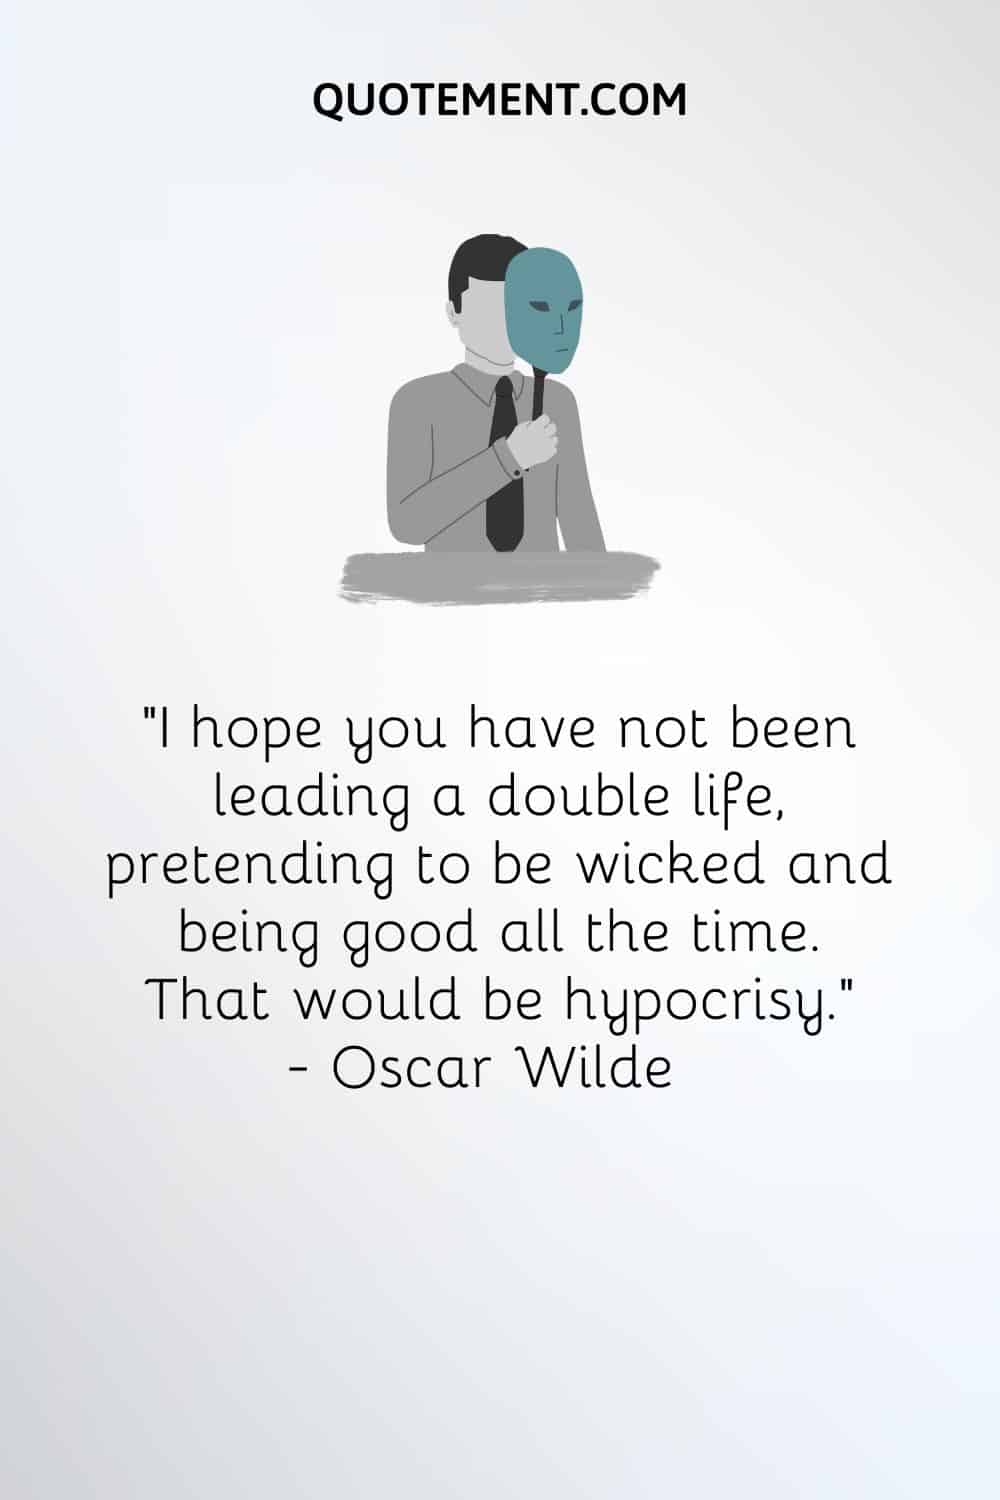 “I hope you have not been leading a double life, pretending to be wicked and being good all the time. That would be hypocrisy.” — Oscar Wilde